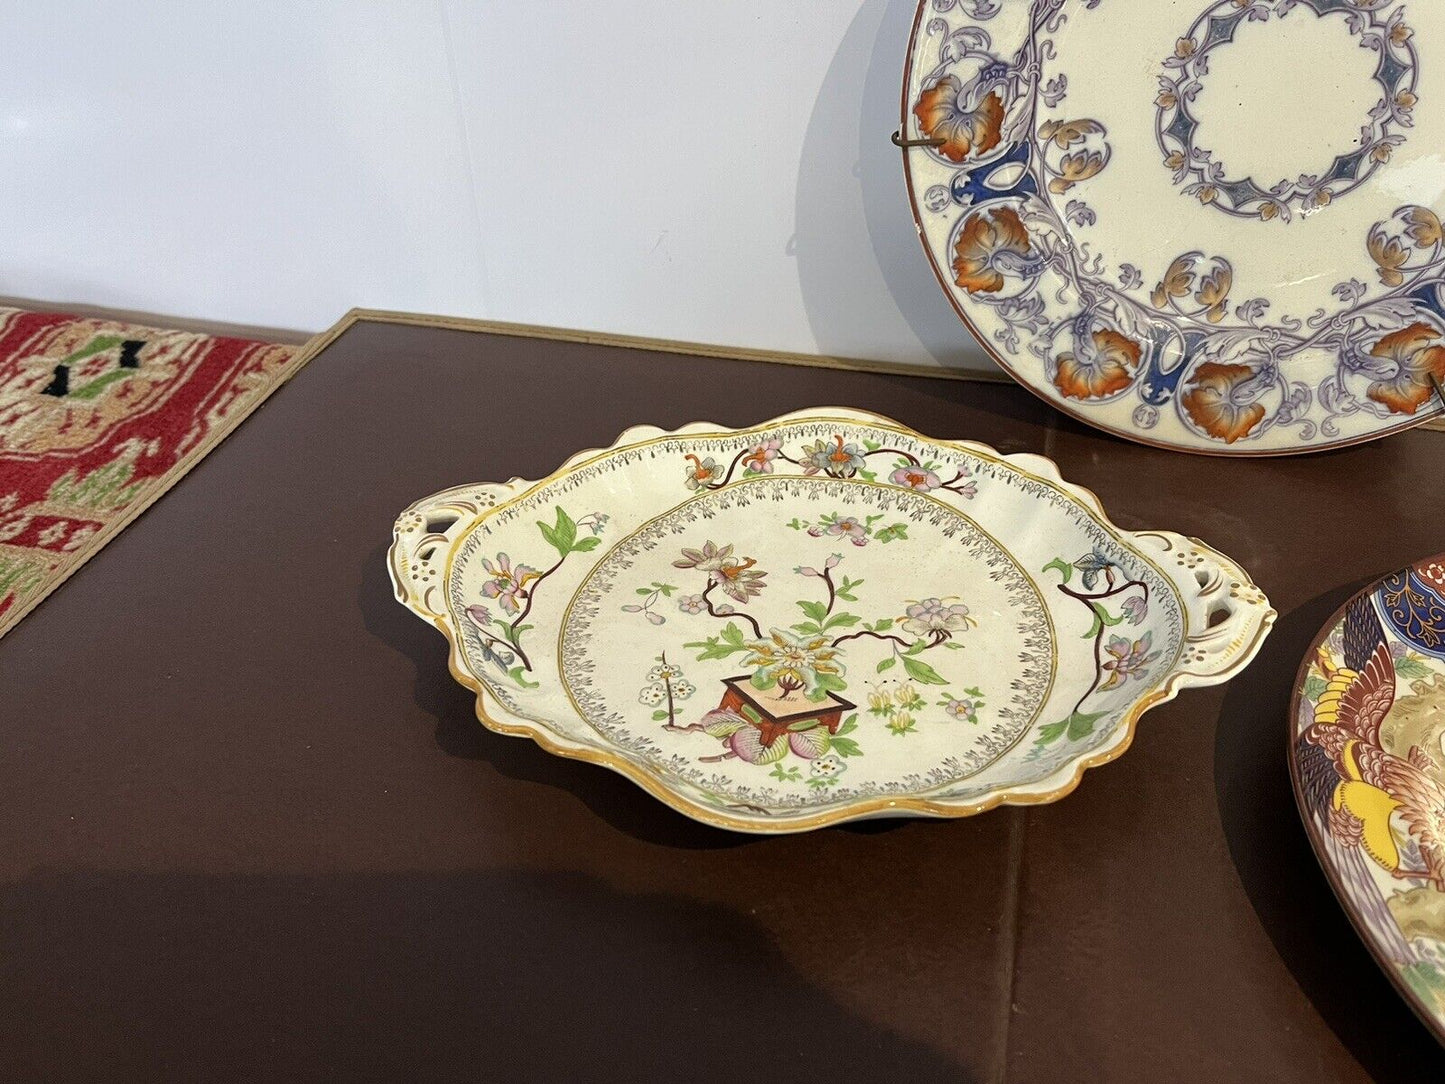 Collection Of Plates